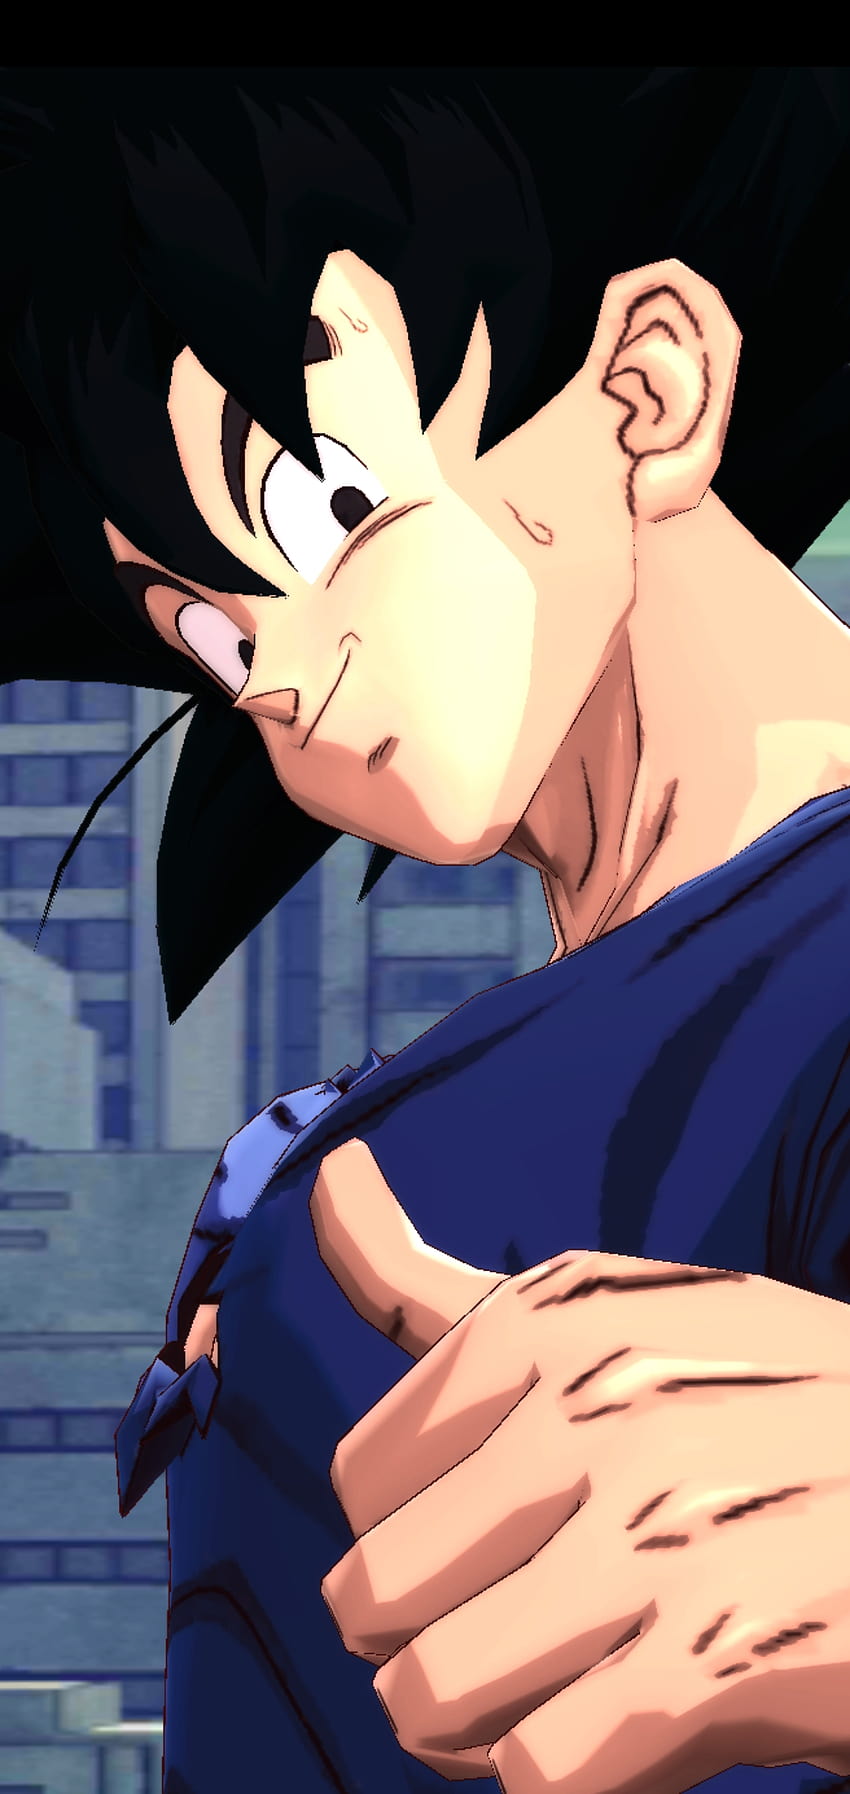 Goku after kid buu fight for note 10 +. Enjoy! I also can do other ones if you guys wish: DragonballLegends, goku and kid buu HD phone wallpaper